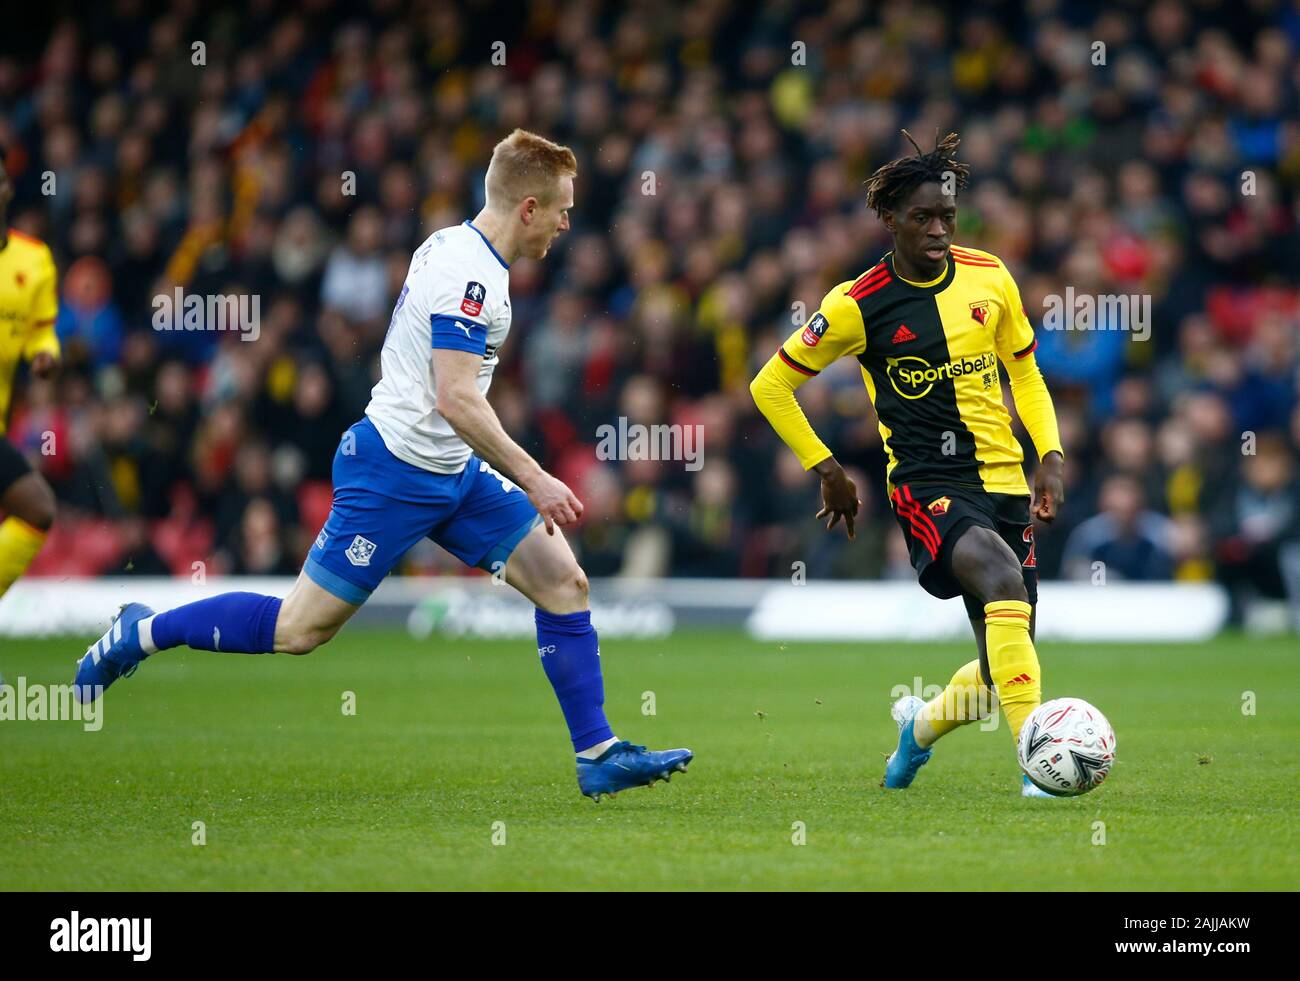 Watford, UK. 04th Jan, 2020. WATFORD, ENGLAND - JANUARY 04: Watford's Domingos Quina during Emirates FA Cup Third Round match between Watford and Tranmere Rovers on January 04 2020 at Vicarage Road Stadium, Watford, England. Credit: Action Foto Sport/Alamy Live News Stock Photo